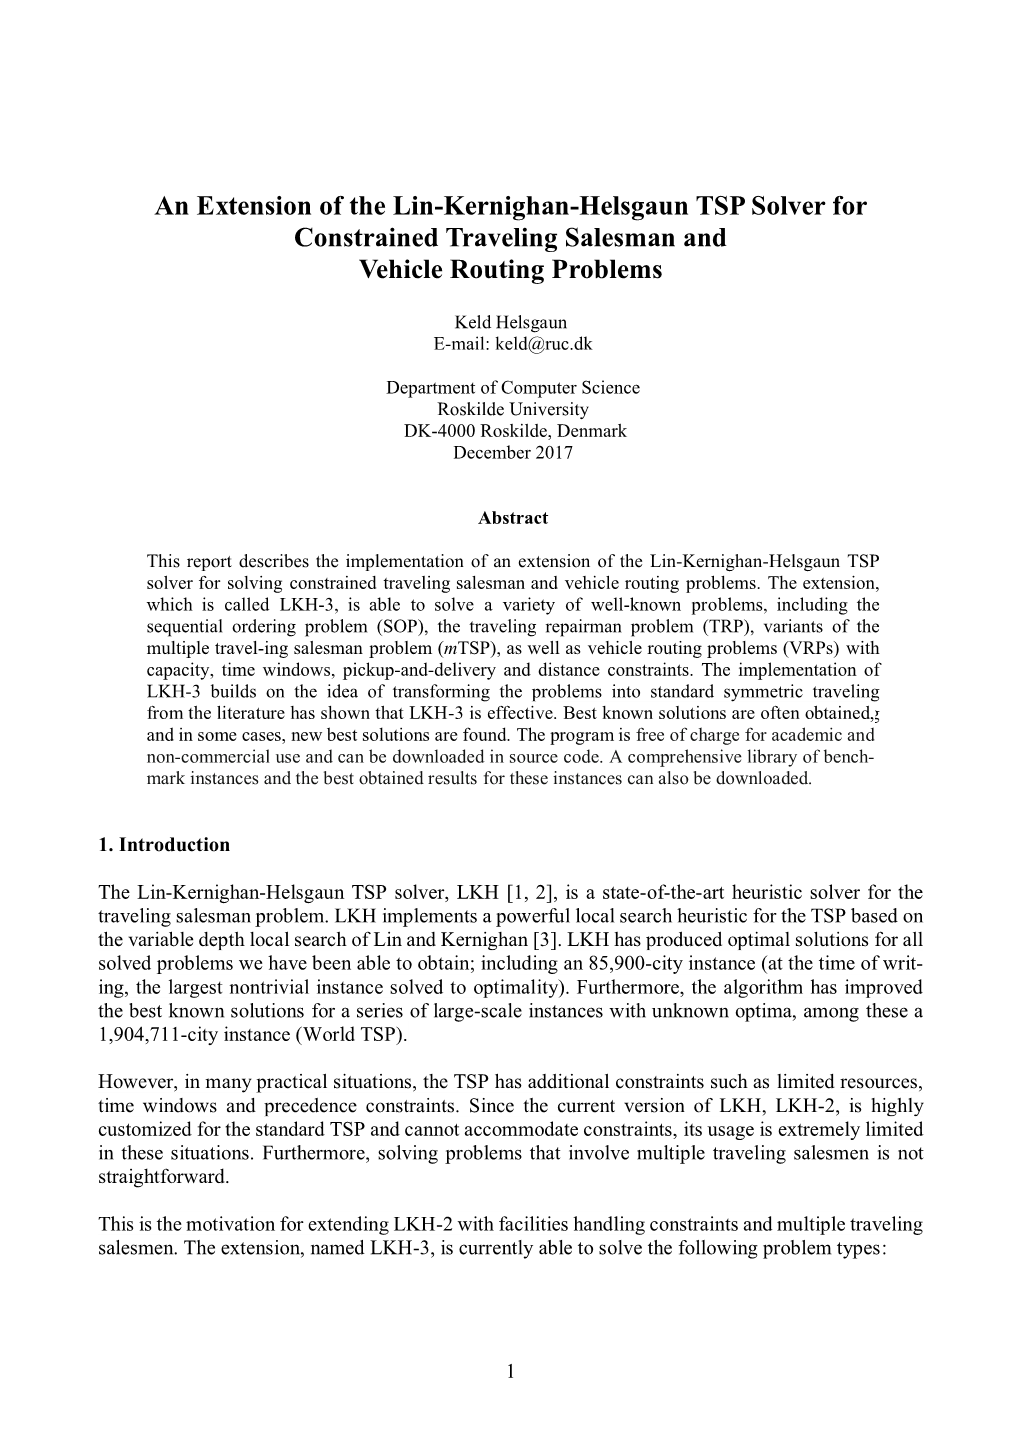 An Extension of the Lin-Kernighan-Helsgaun TSP Solver for Constrained Traveling Salesman and Vehicle Routing Problems